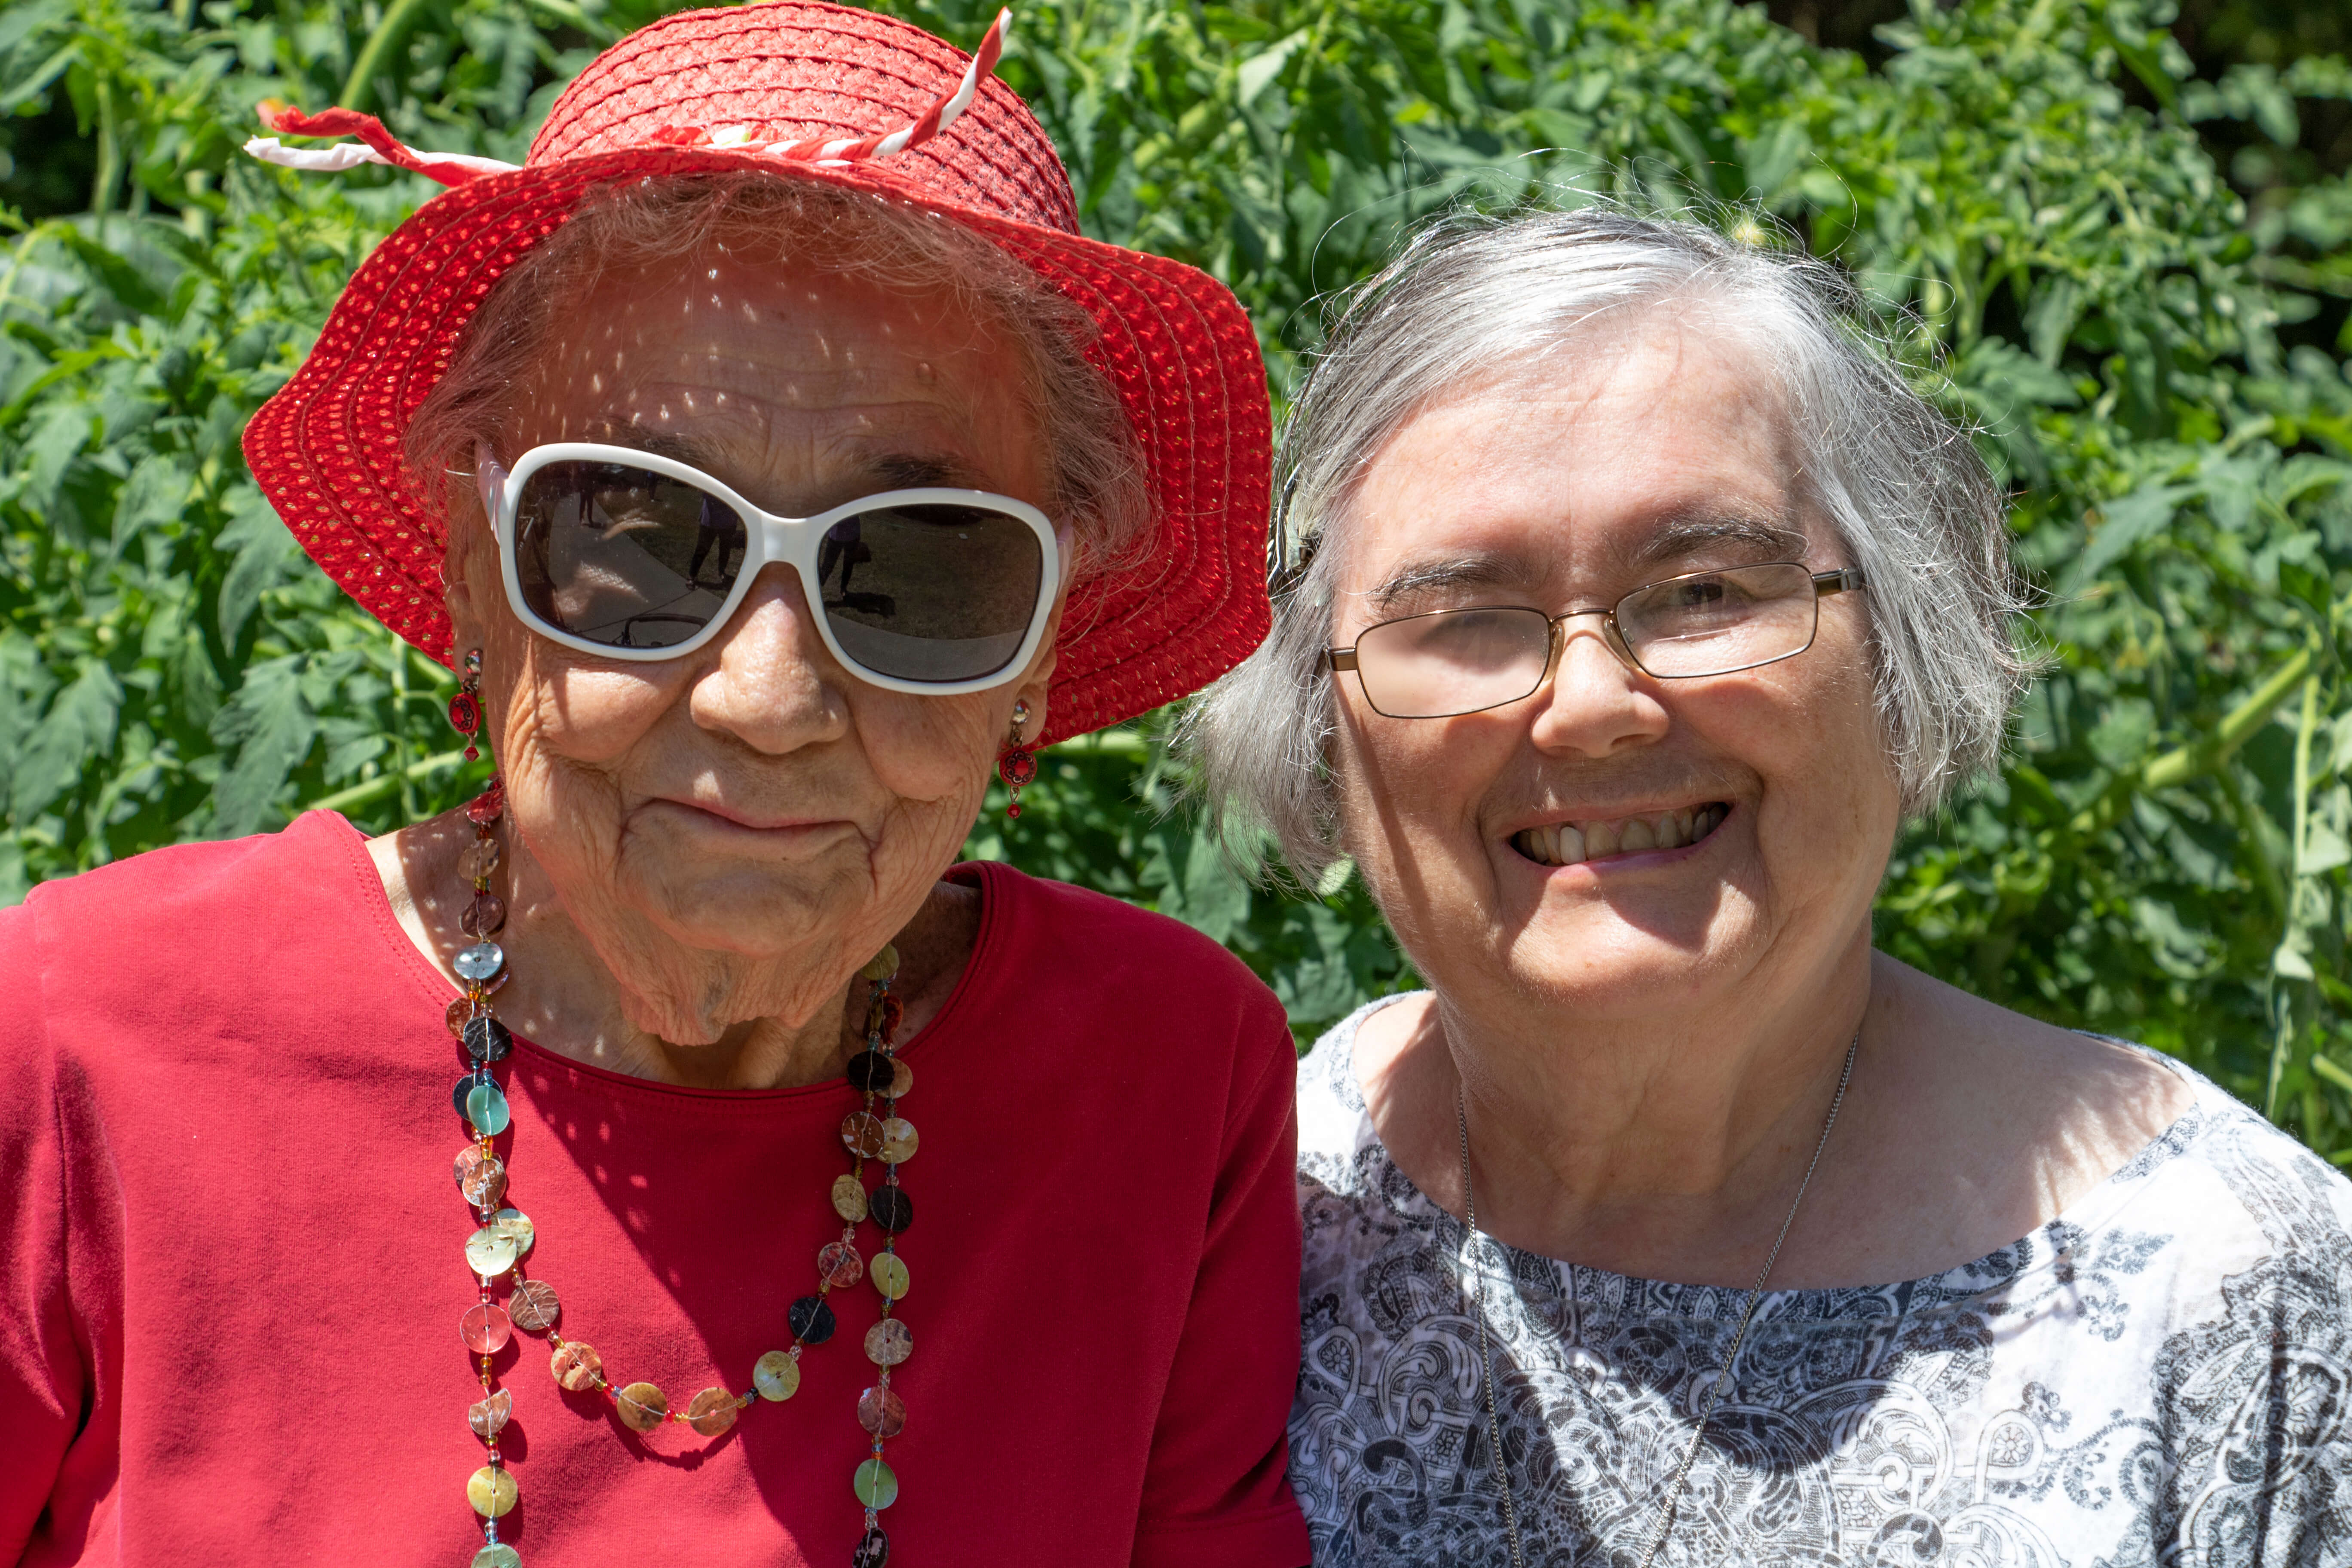 two woman and flowers residents group outside sunglasses